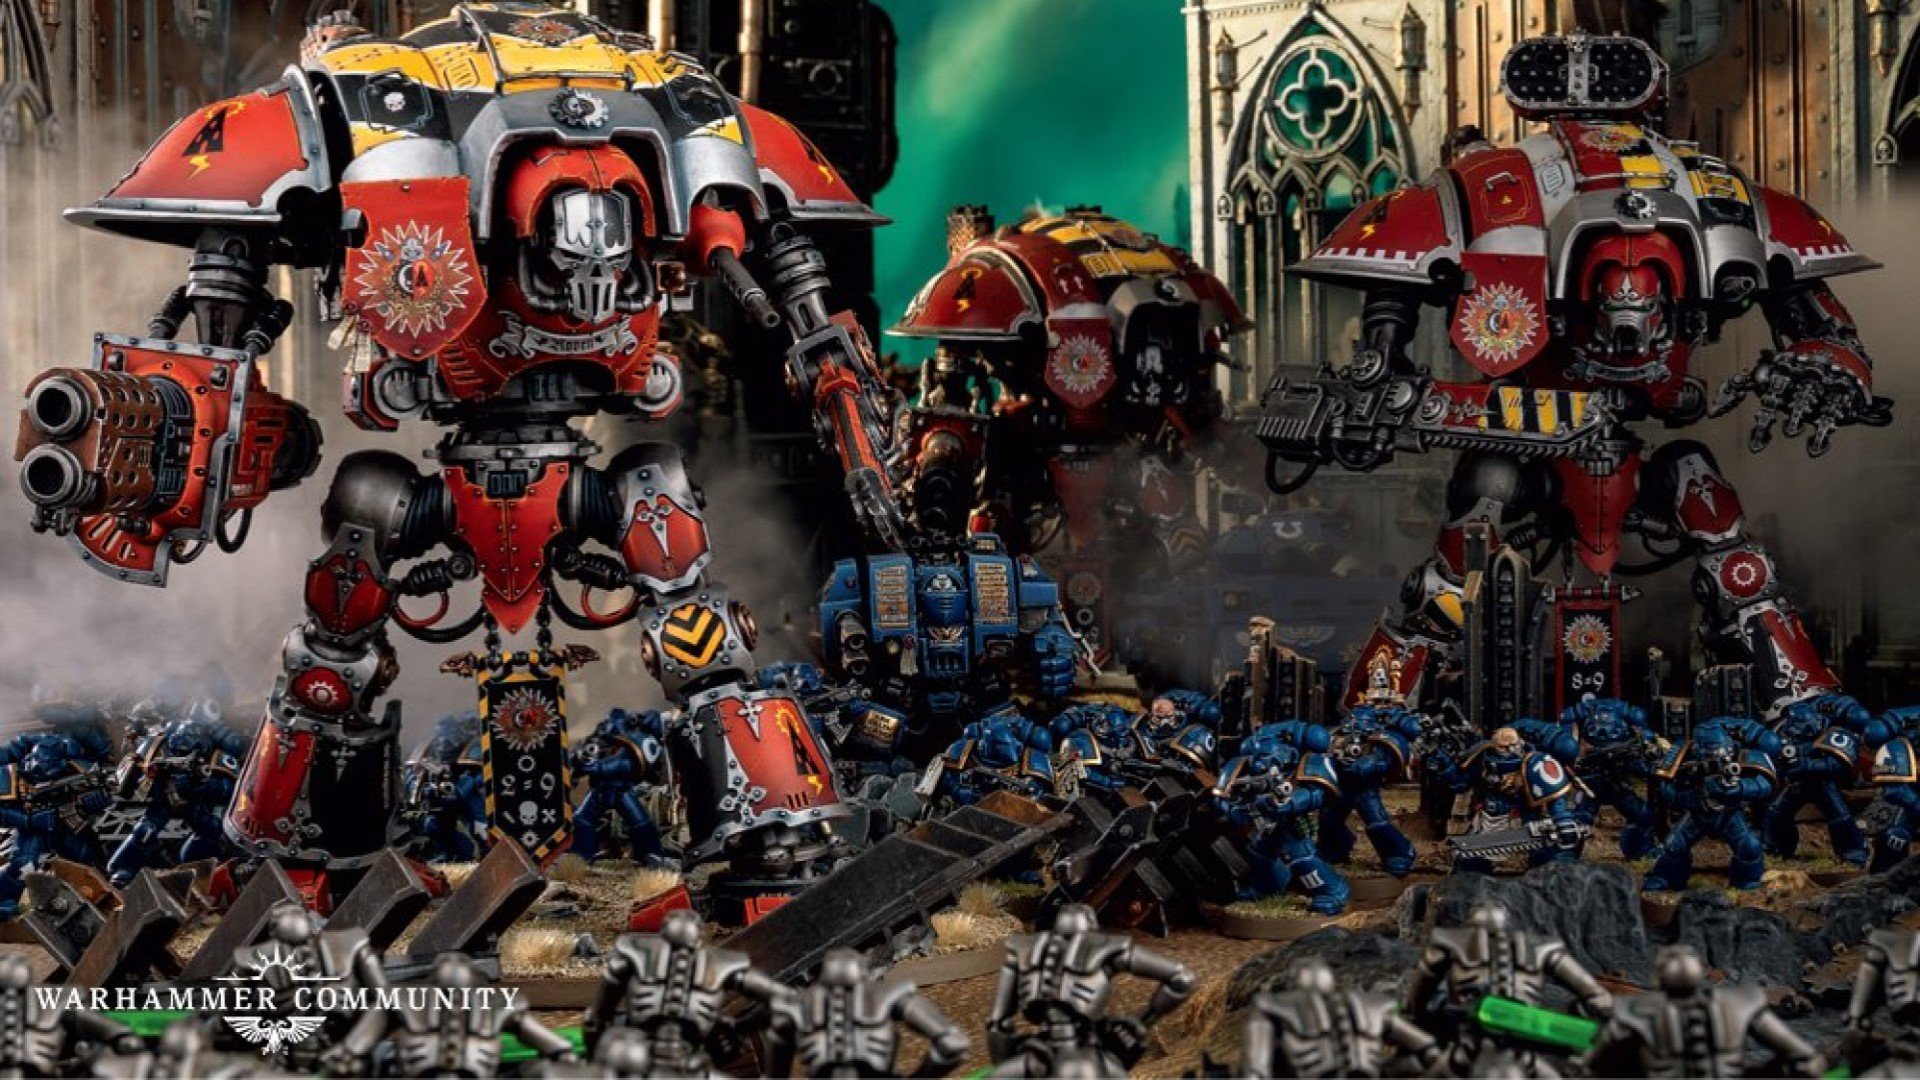 Warhammer 40k Imperial Knights army guide - Warhammer Community photo showing House Raven Imperial Knights models aided by Ultramarines Space Marines